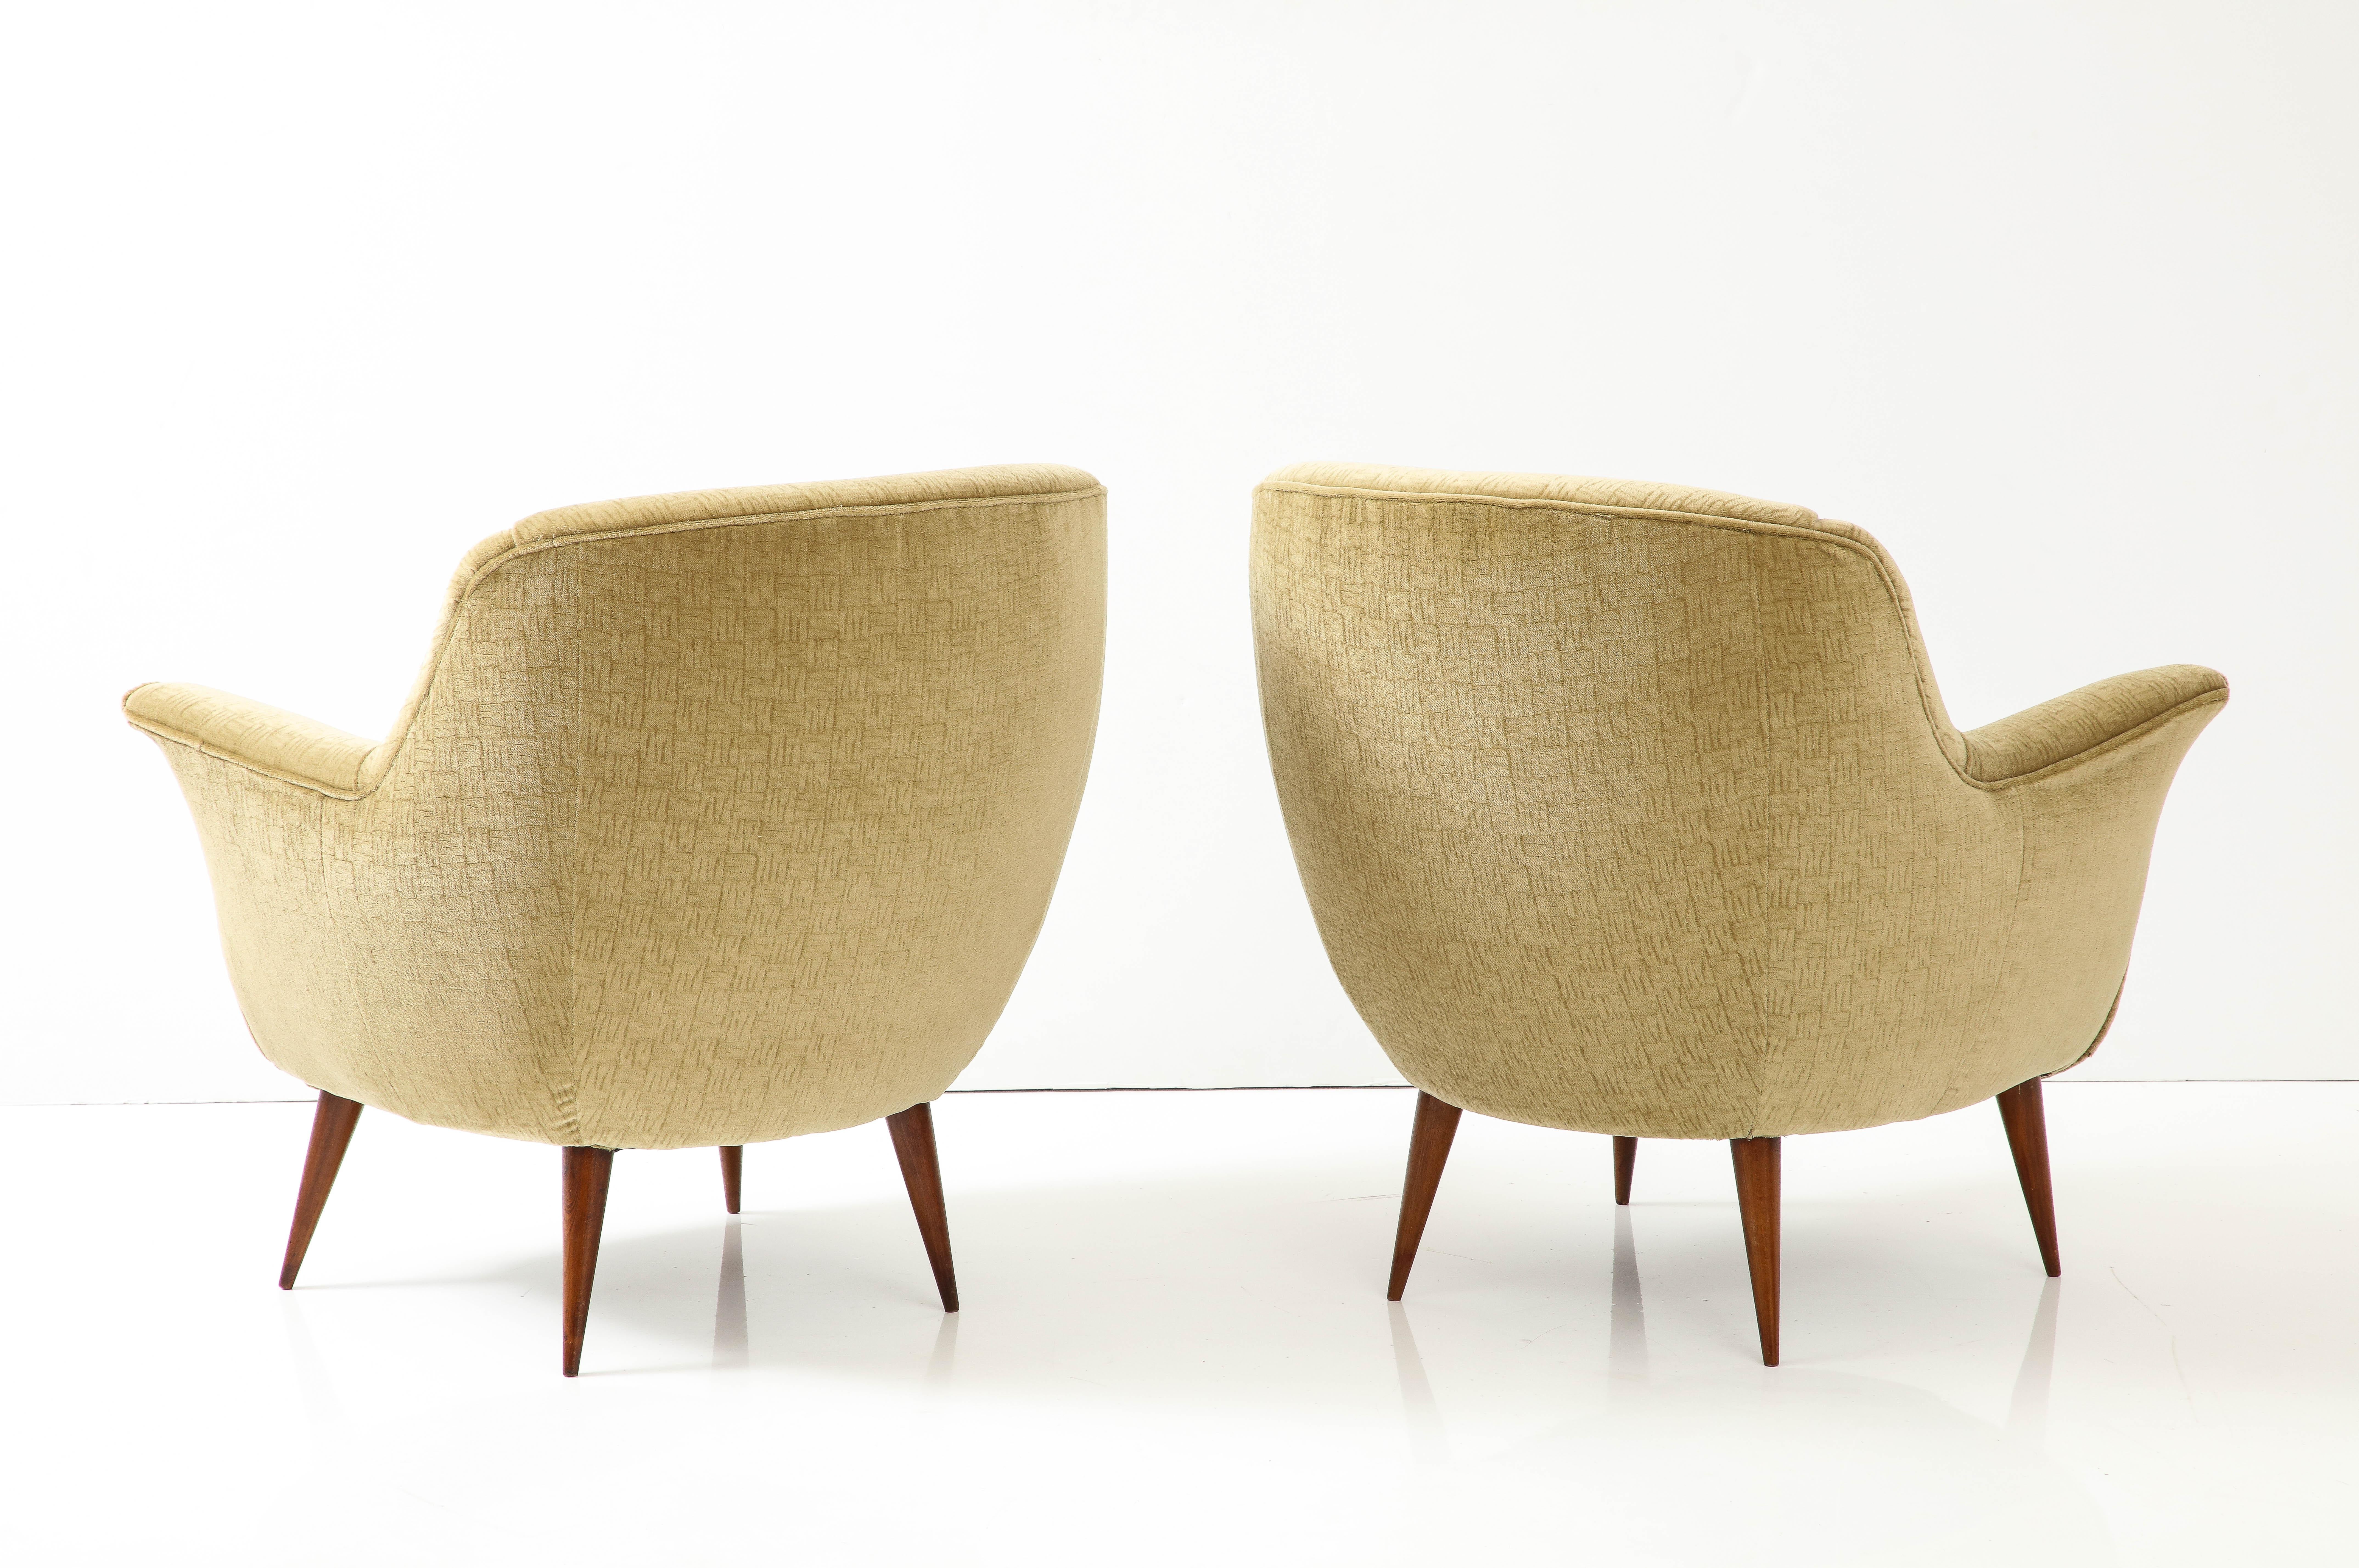 1950's Modernist Gio Ponti Style Italian Lounge Chairs In Mohair Upholstery For Sale 8